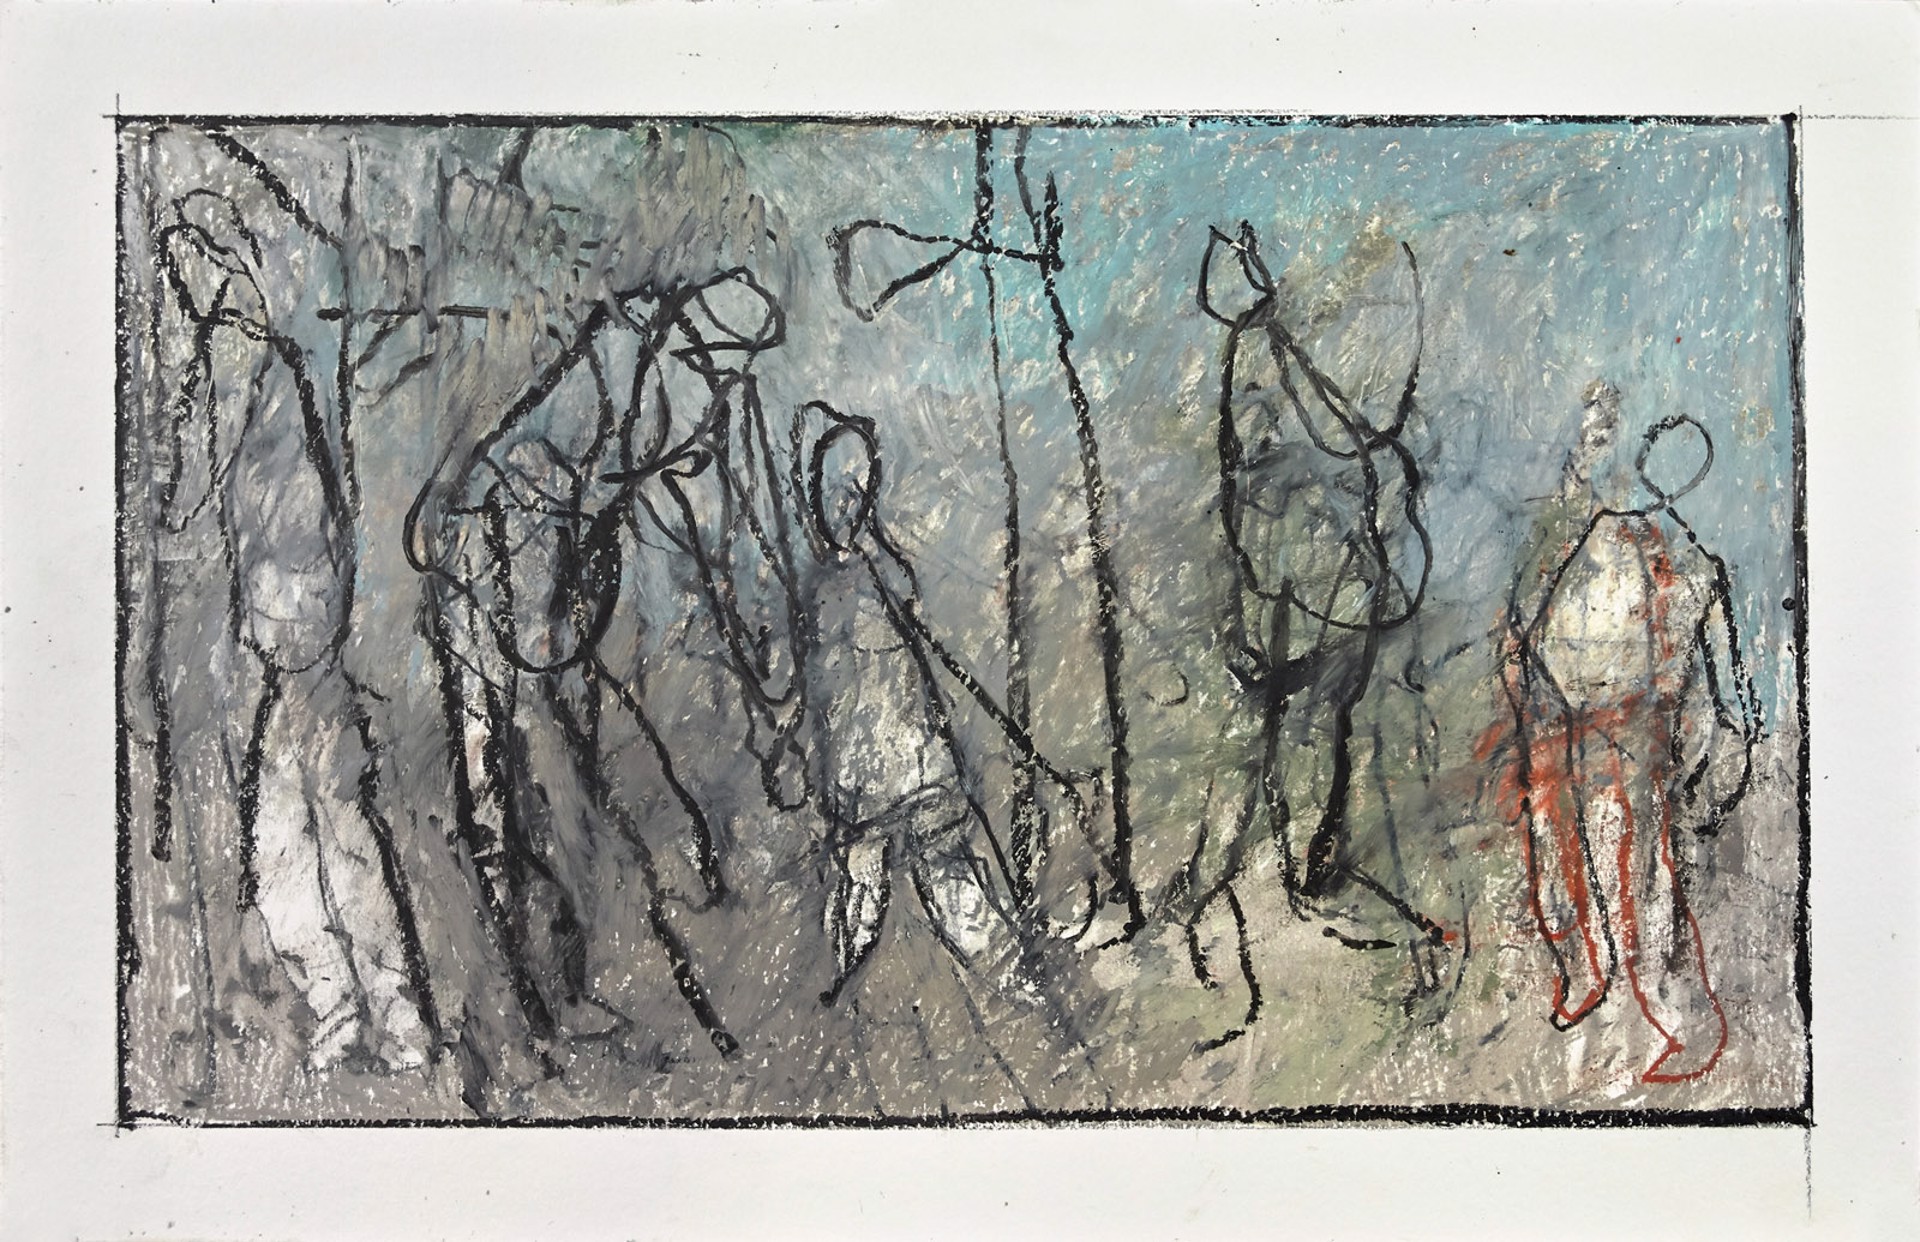 Drawings from Mt Gretna: Five Figures by Thaddeus Radell